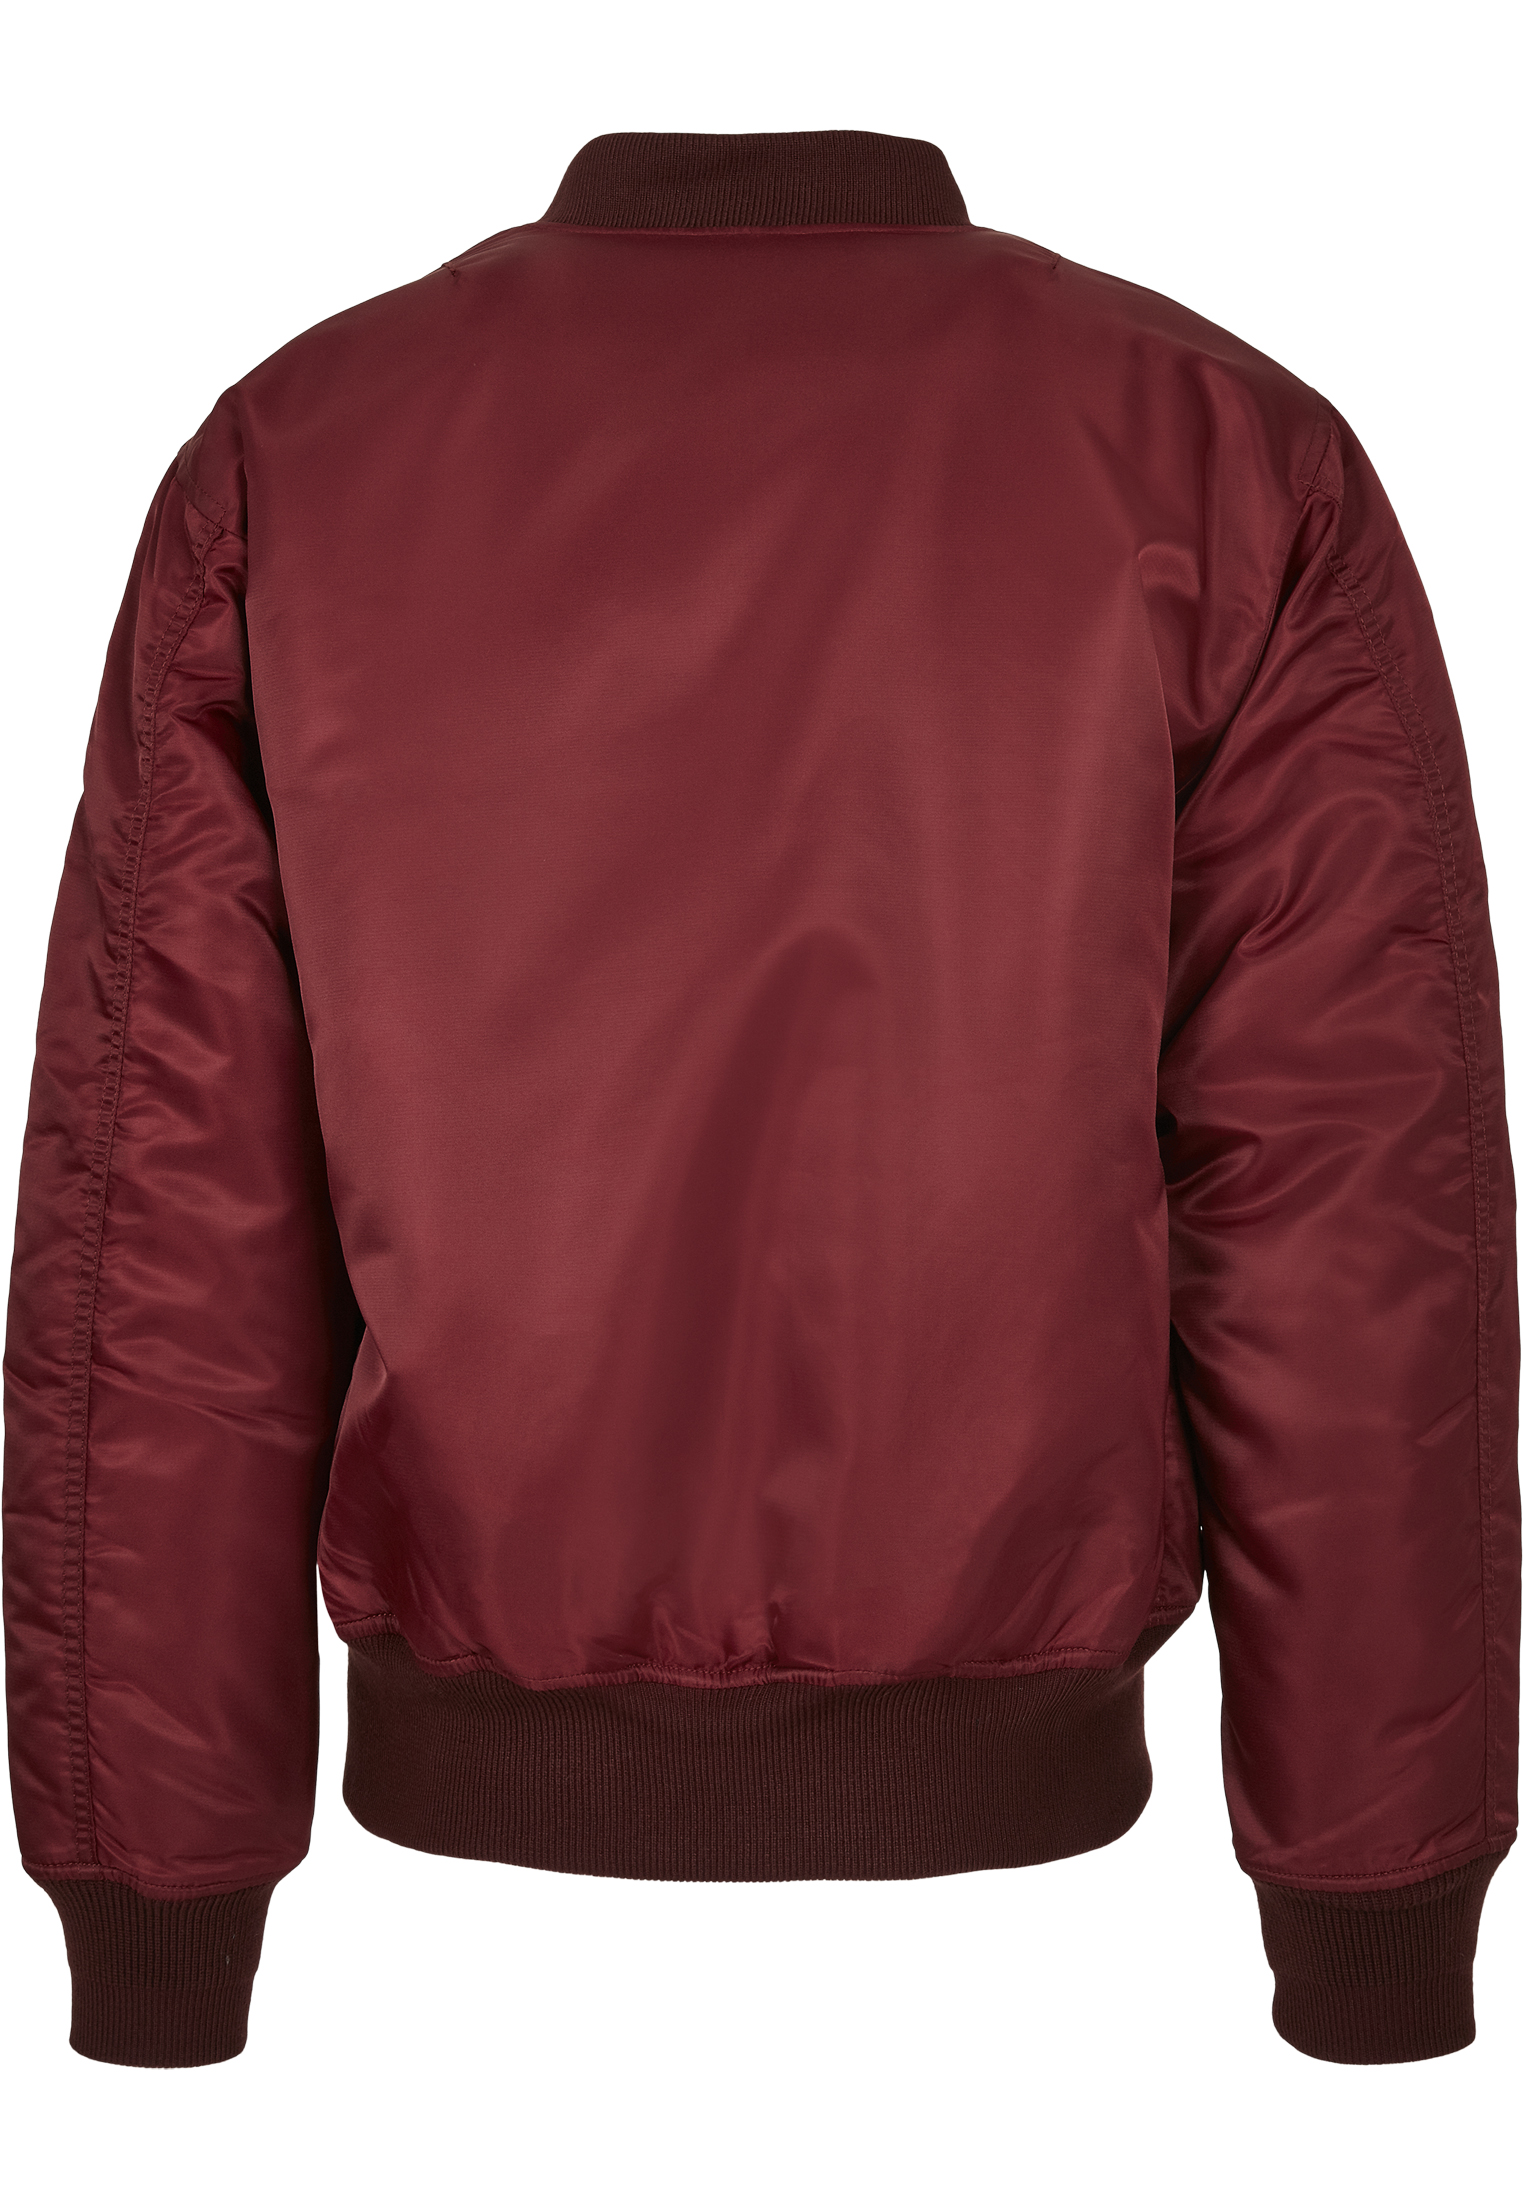 Build Your Brandit MA1 Jacket in Farbe burgundy